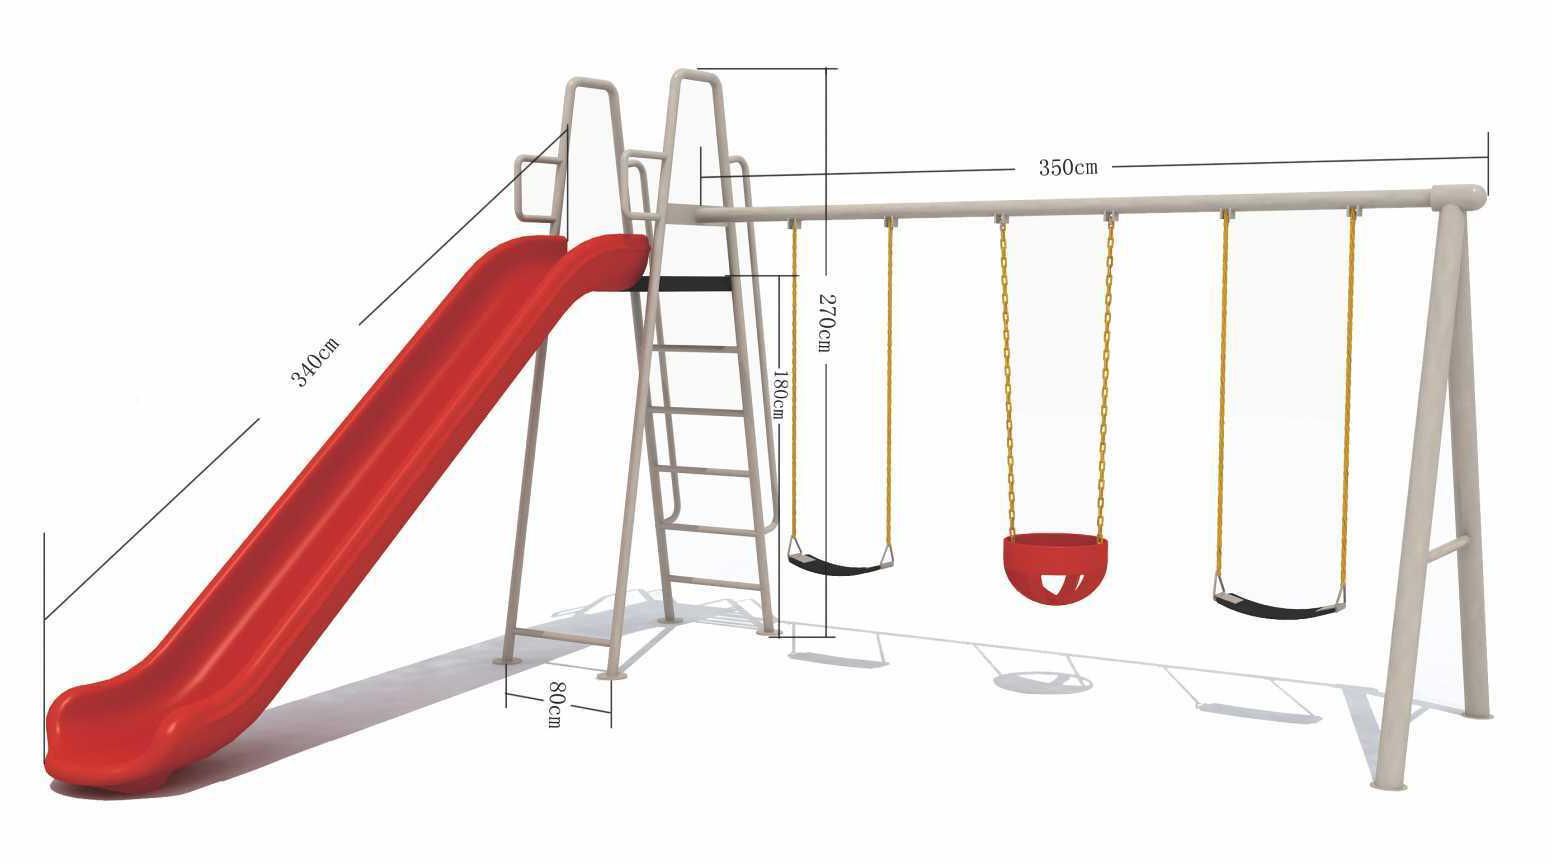 Rbwtoys New Outdoor Swing Series With Premium Metal, 2 In1 Swing And Slide, Playset For Kids RW-13114 430&times;395&times;270cm